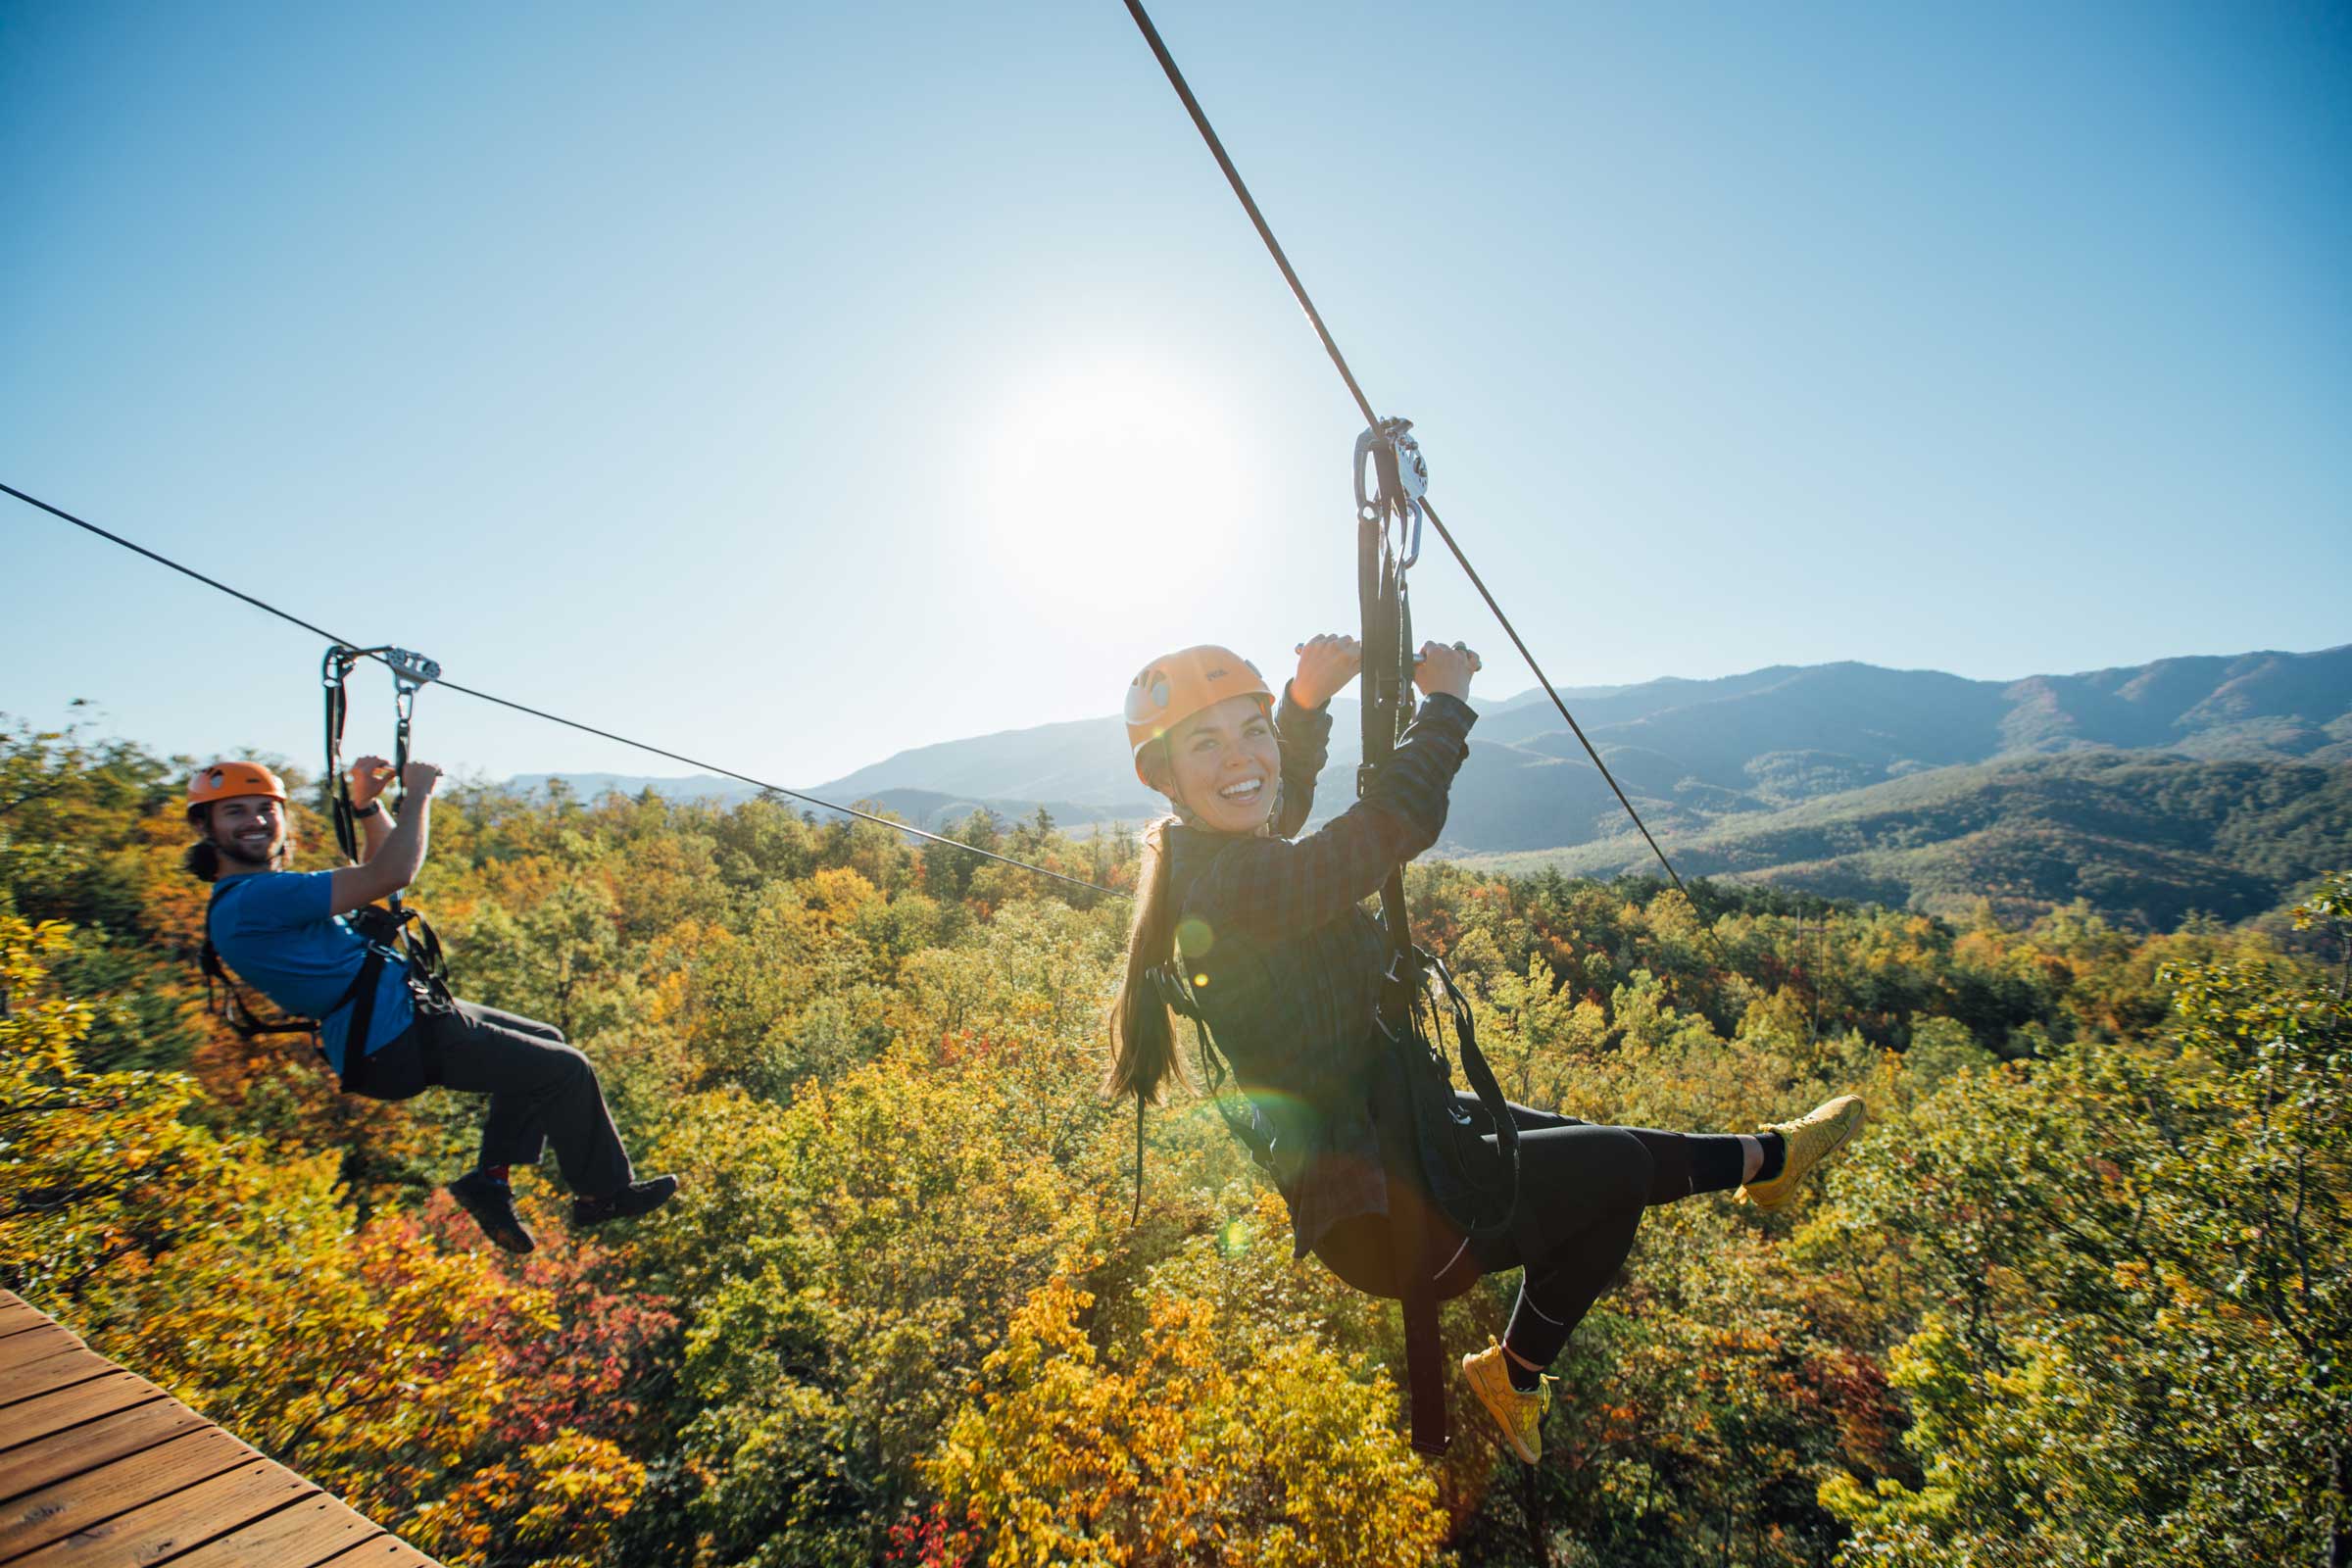 Best Ziplining in the Smoky Mountains